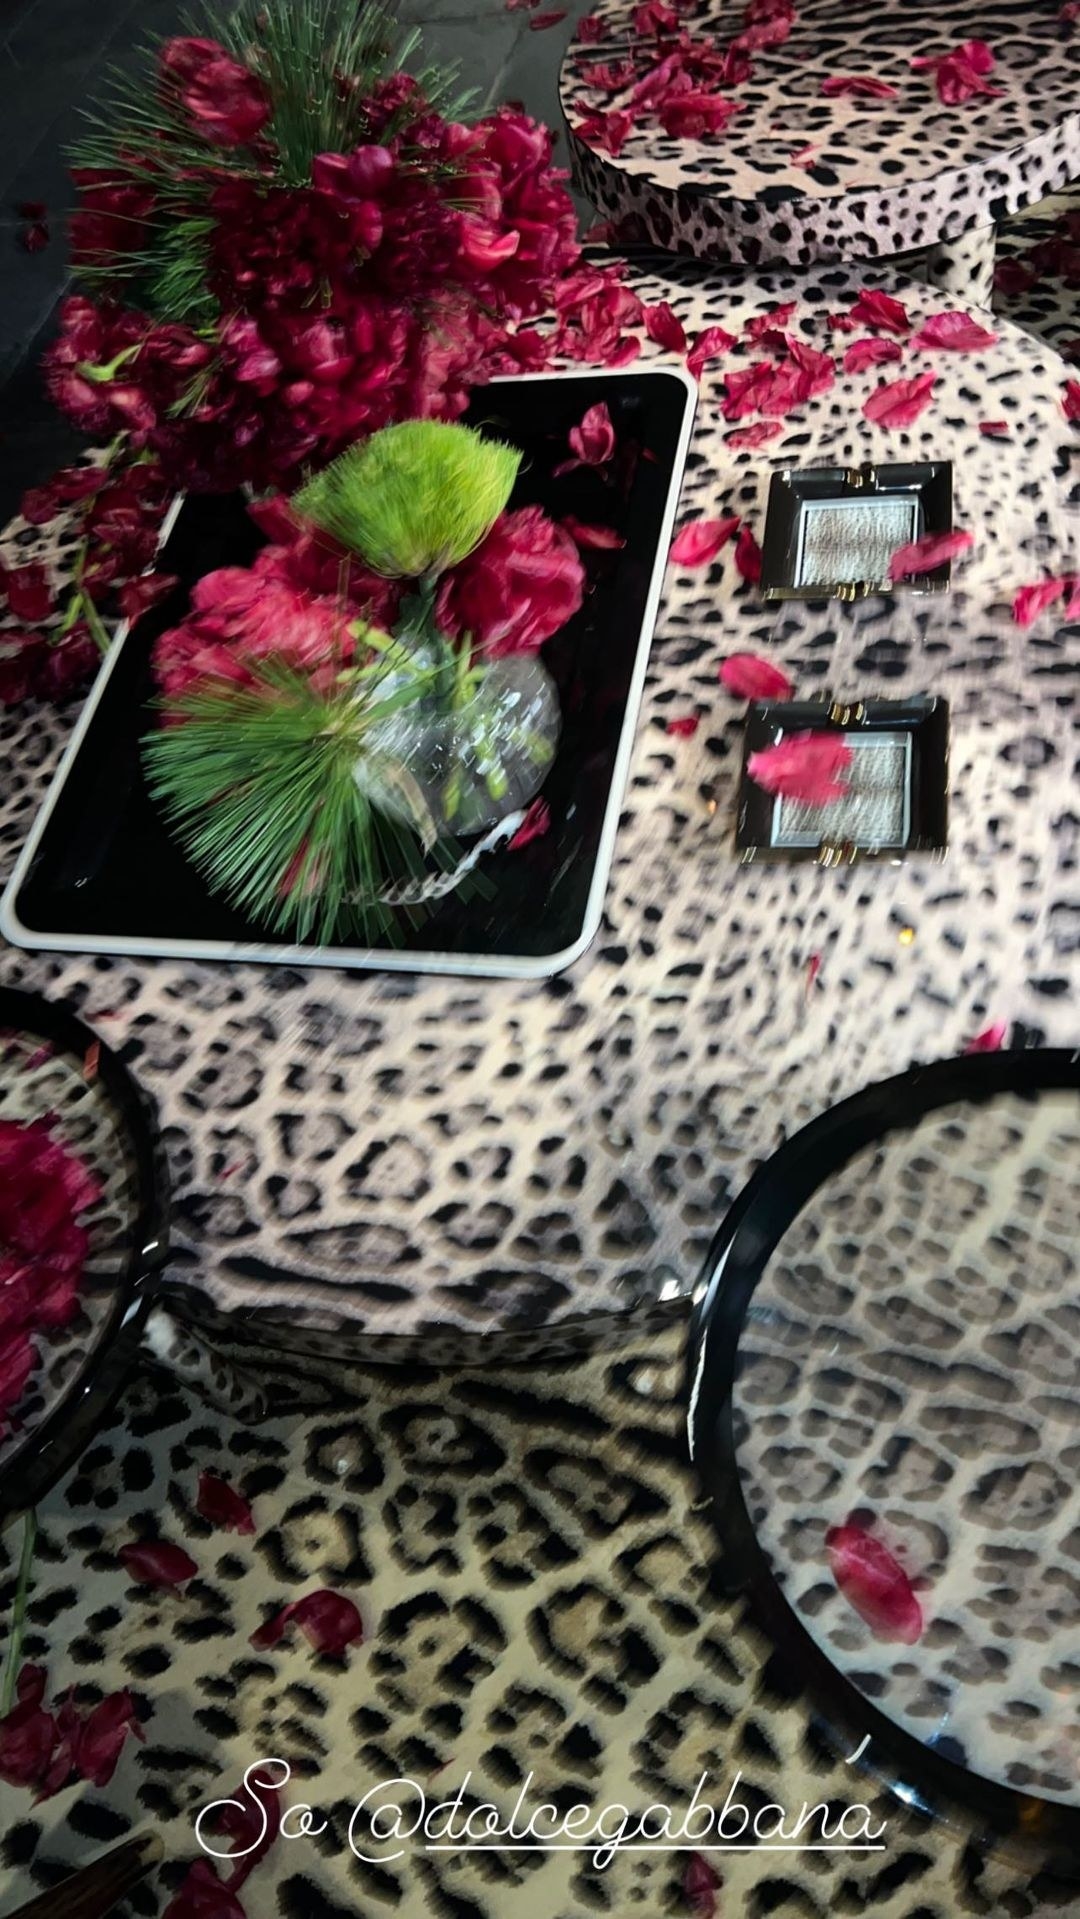 The tables are covered with leopard print designs and hold flowers